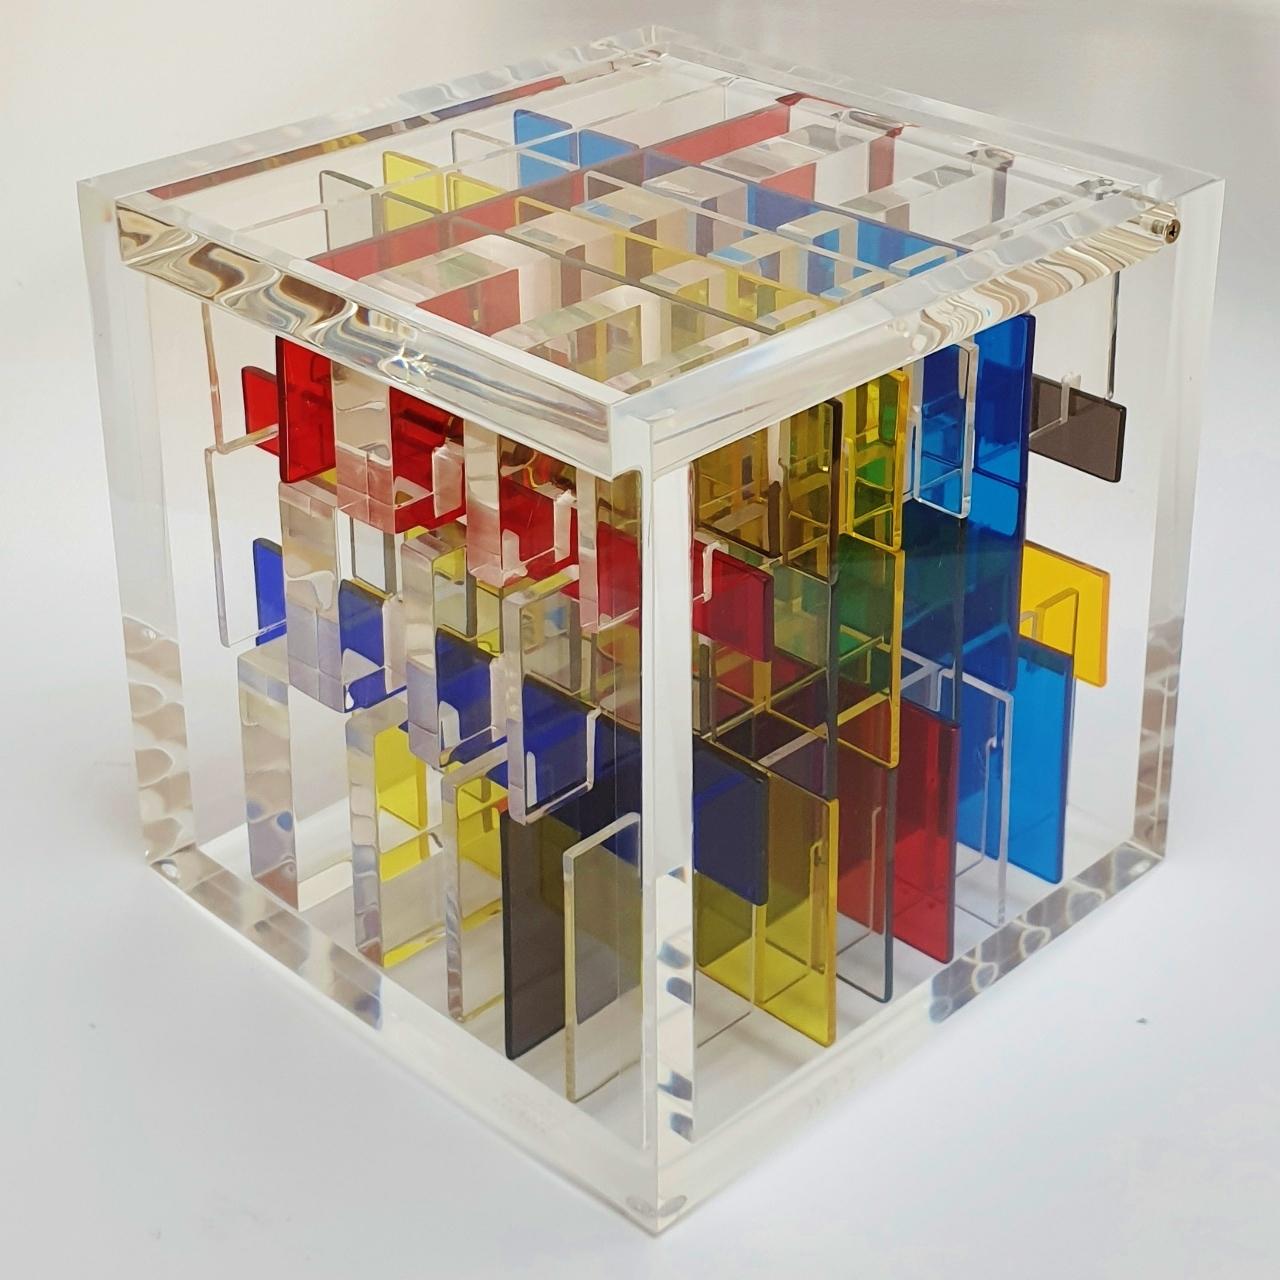 Boogie-woogie is a unique contemporary modern cube sculpture by the famous Dutch artist couple Nel Haringa and Fred Olijve. The cube sculpture consists of a few dozen hand cut hand polished plexiglass elements carefully stacked together inside a